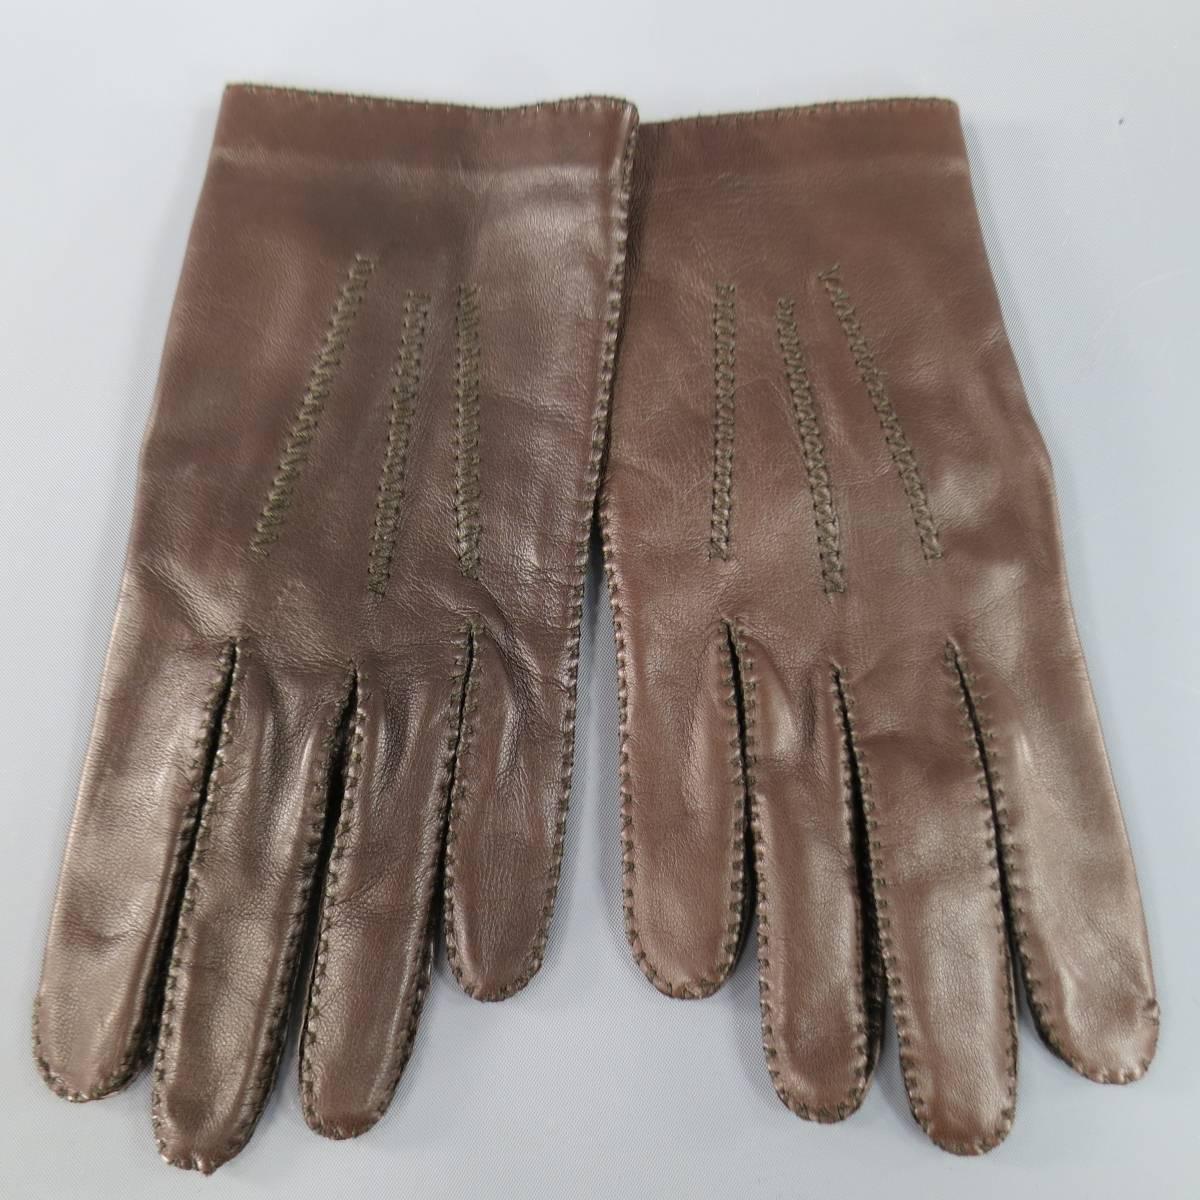 Vintage HERMES gloves in a rich chocolate brown lambskin leather with top stitching throughout. Made in France.
 
New without Tags. 
Marked: 8
 
Measurements:
Length: 9 in.
Width: 4 in.